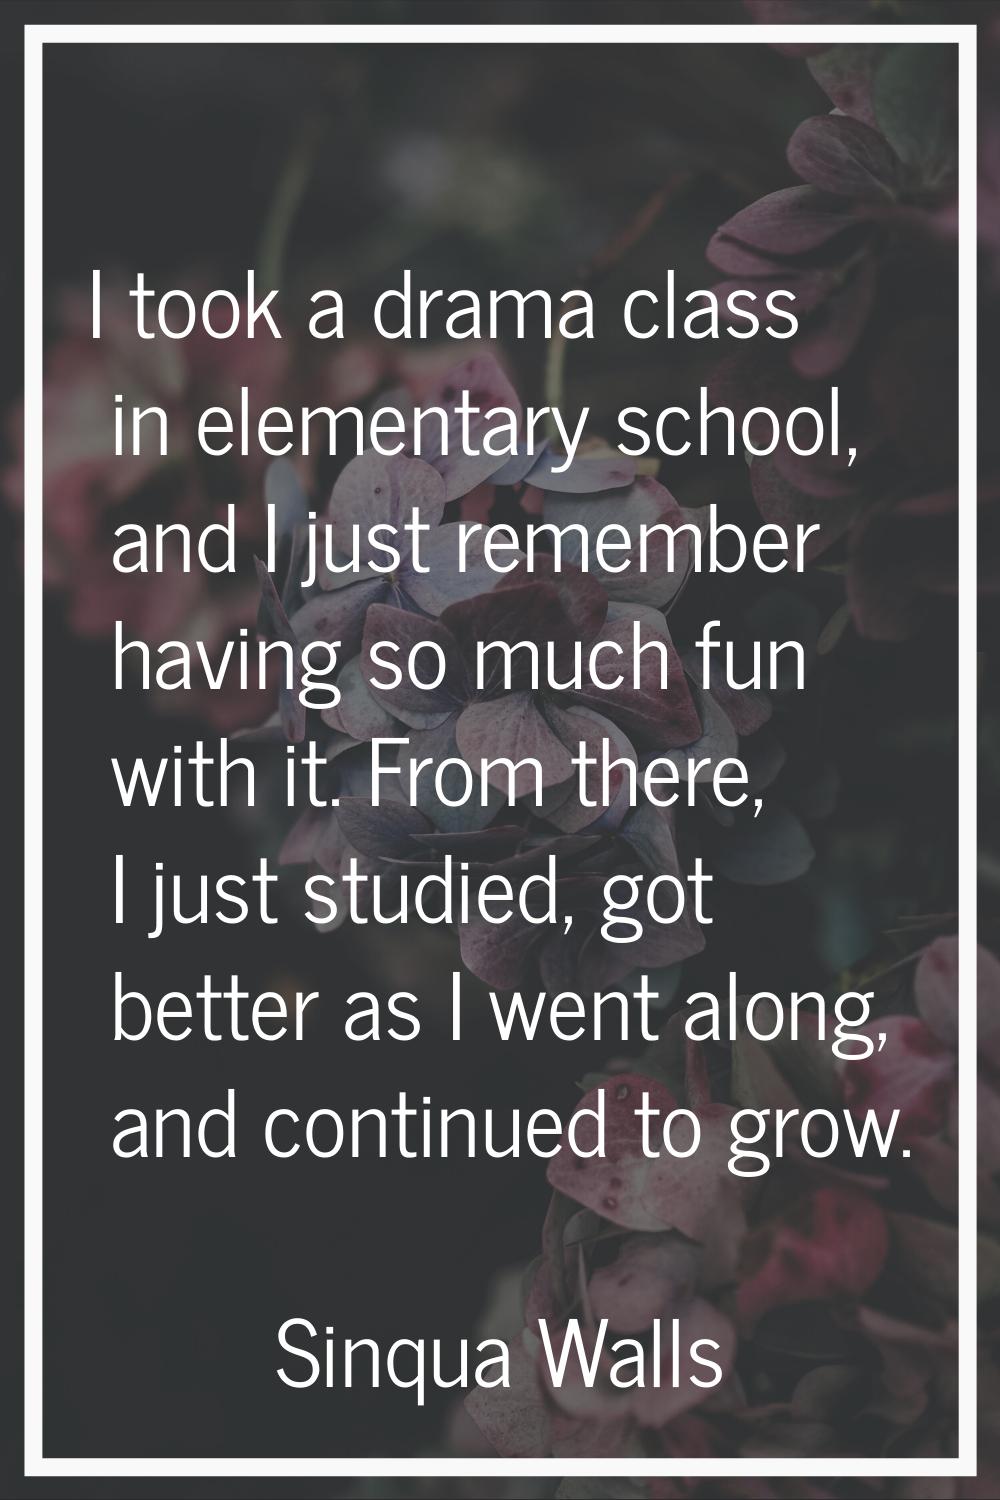 I took a drama class in elementary school, and I just remember having so much fun with it. From the